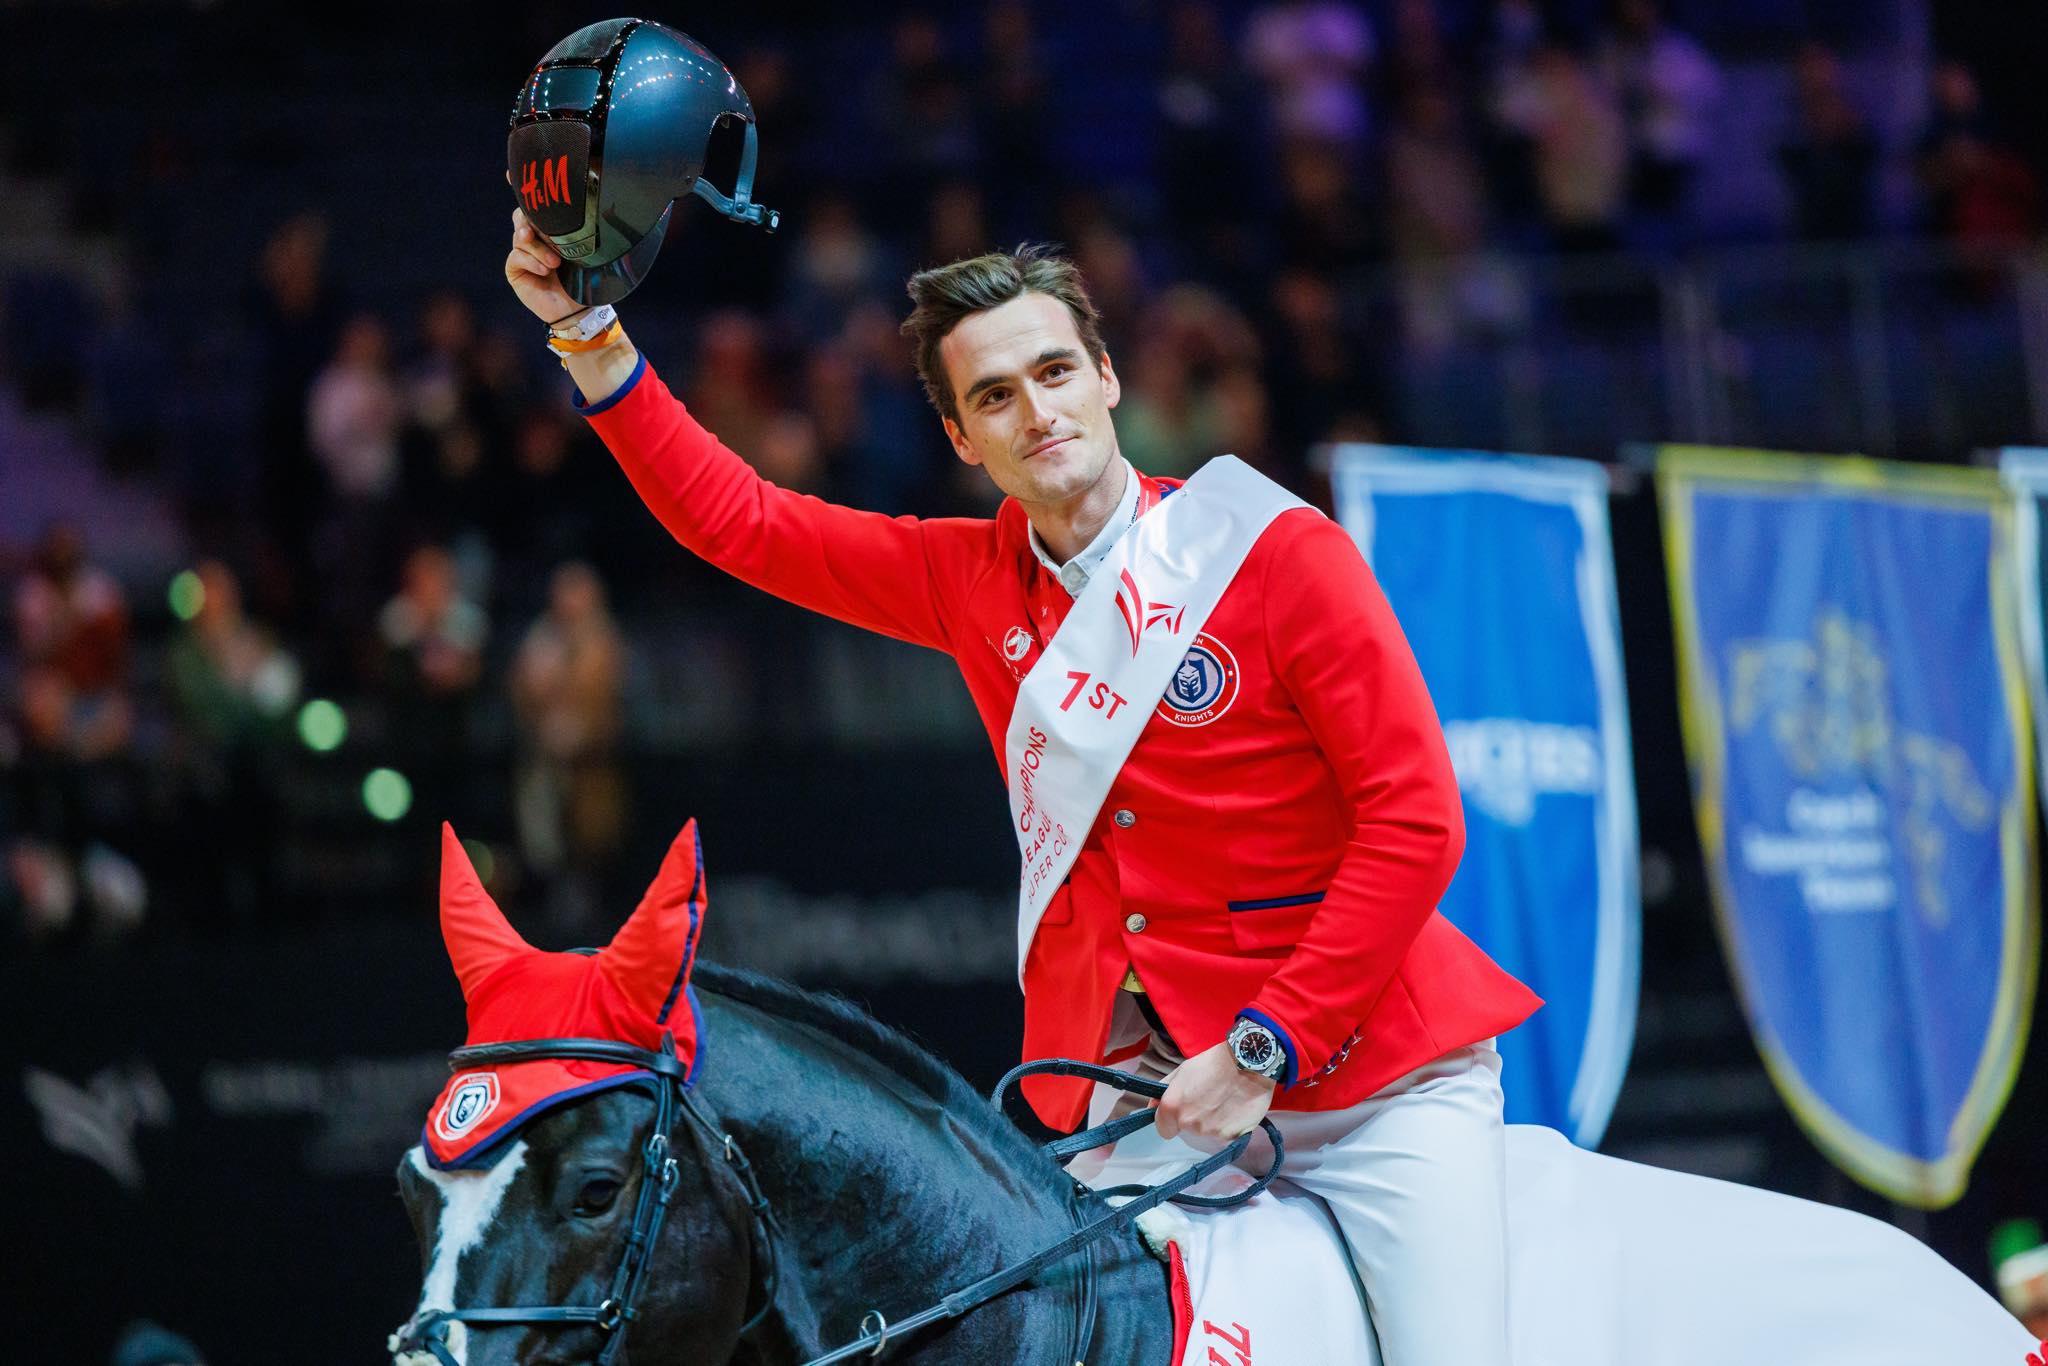 Olivier Philippaerts leaves confident to Doha: "The results from the past weeks proof that my horses are in shape"